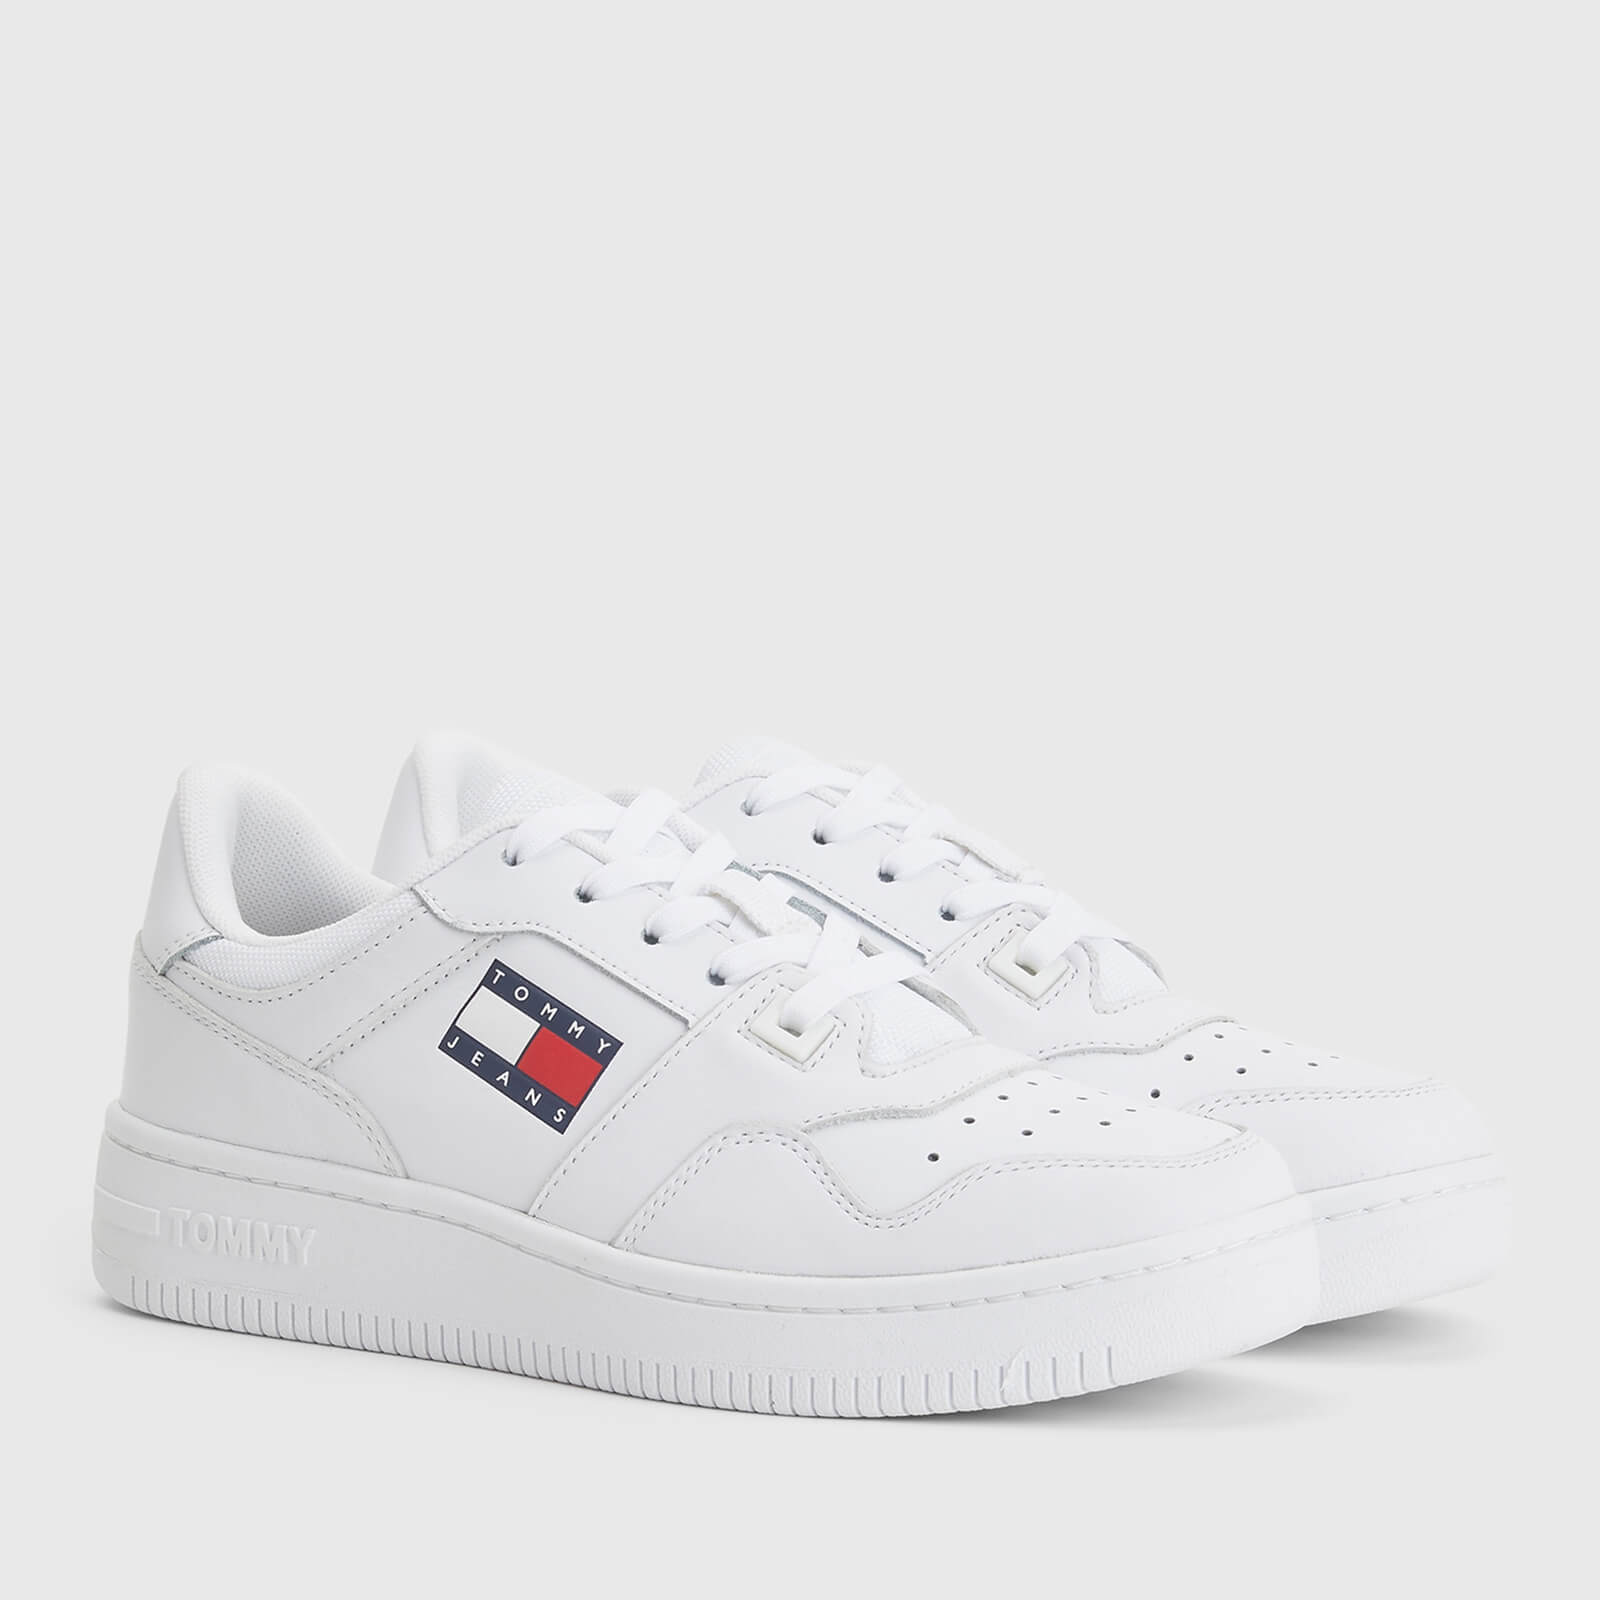 Tommy Jeans Women’s Retro Basket Leather Trainers